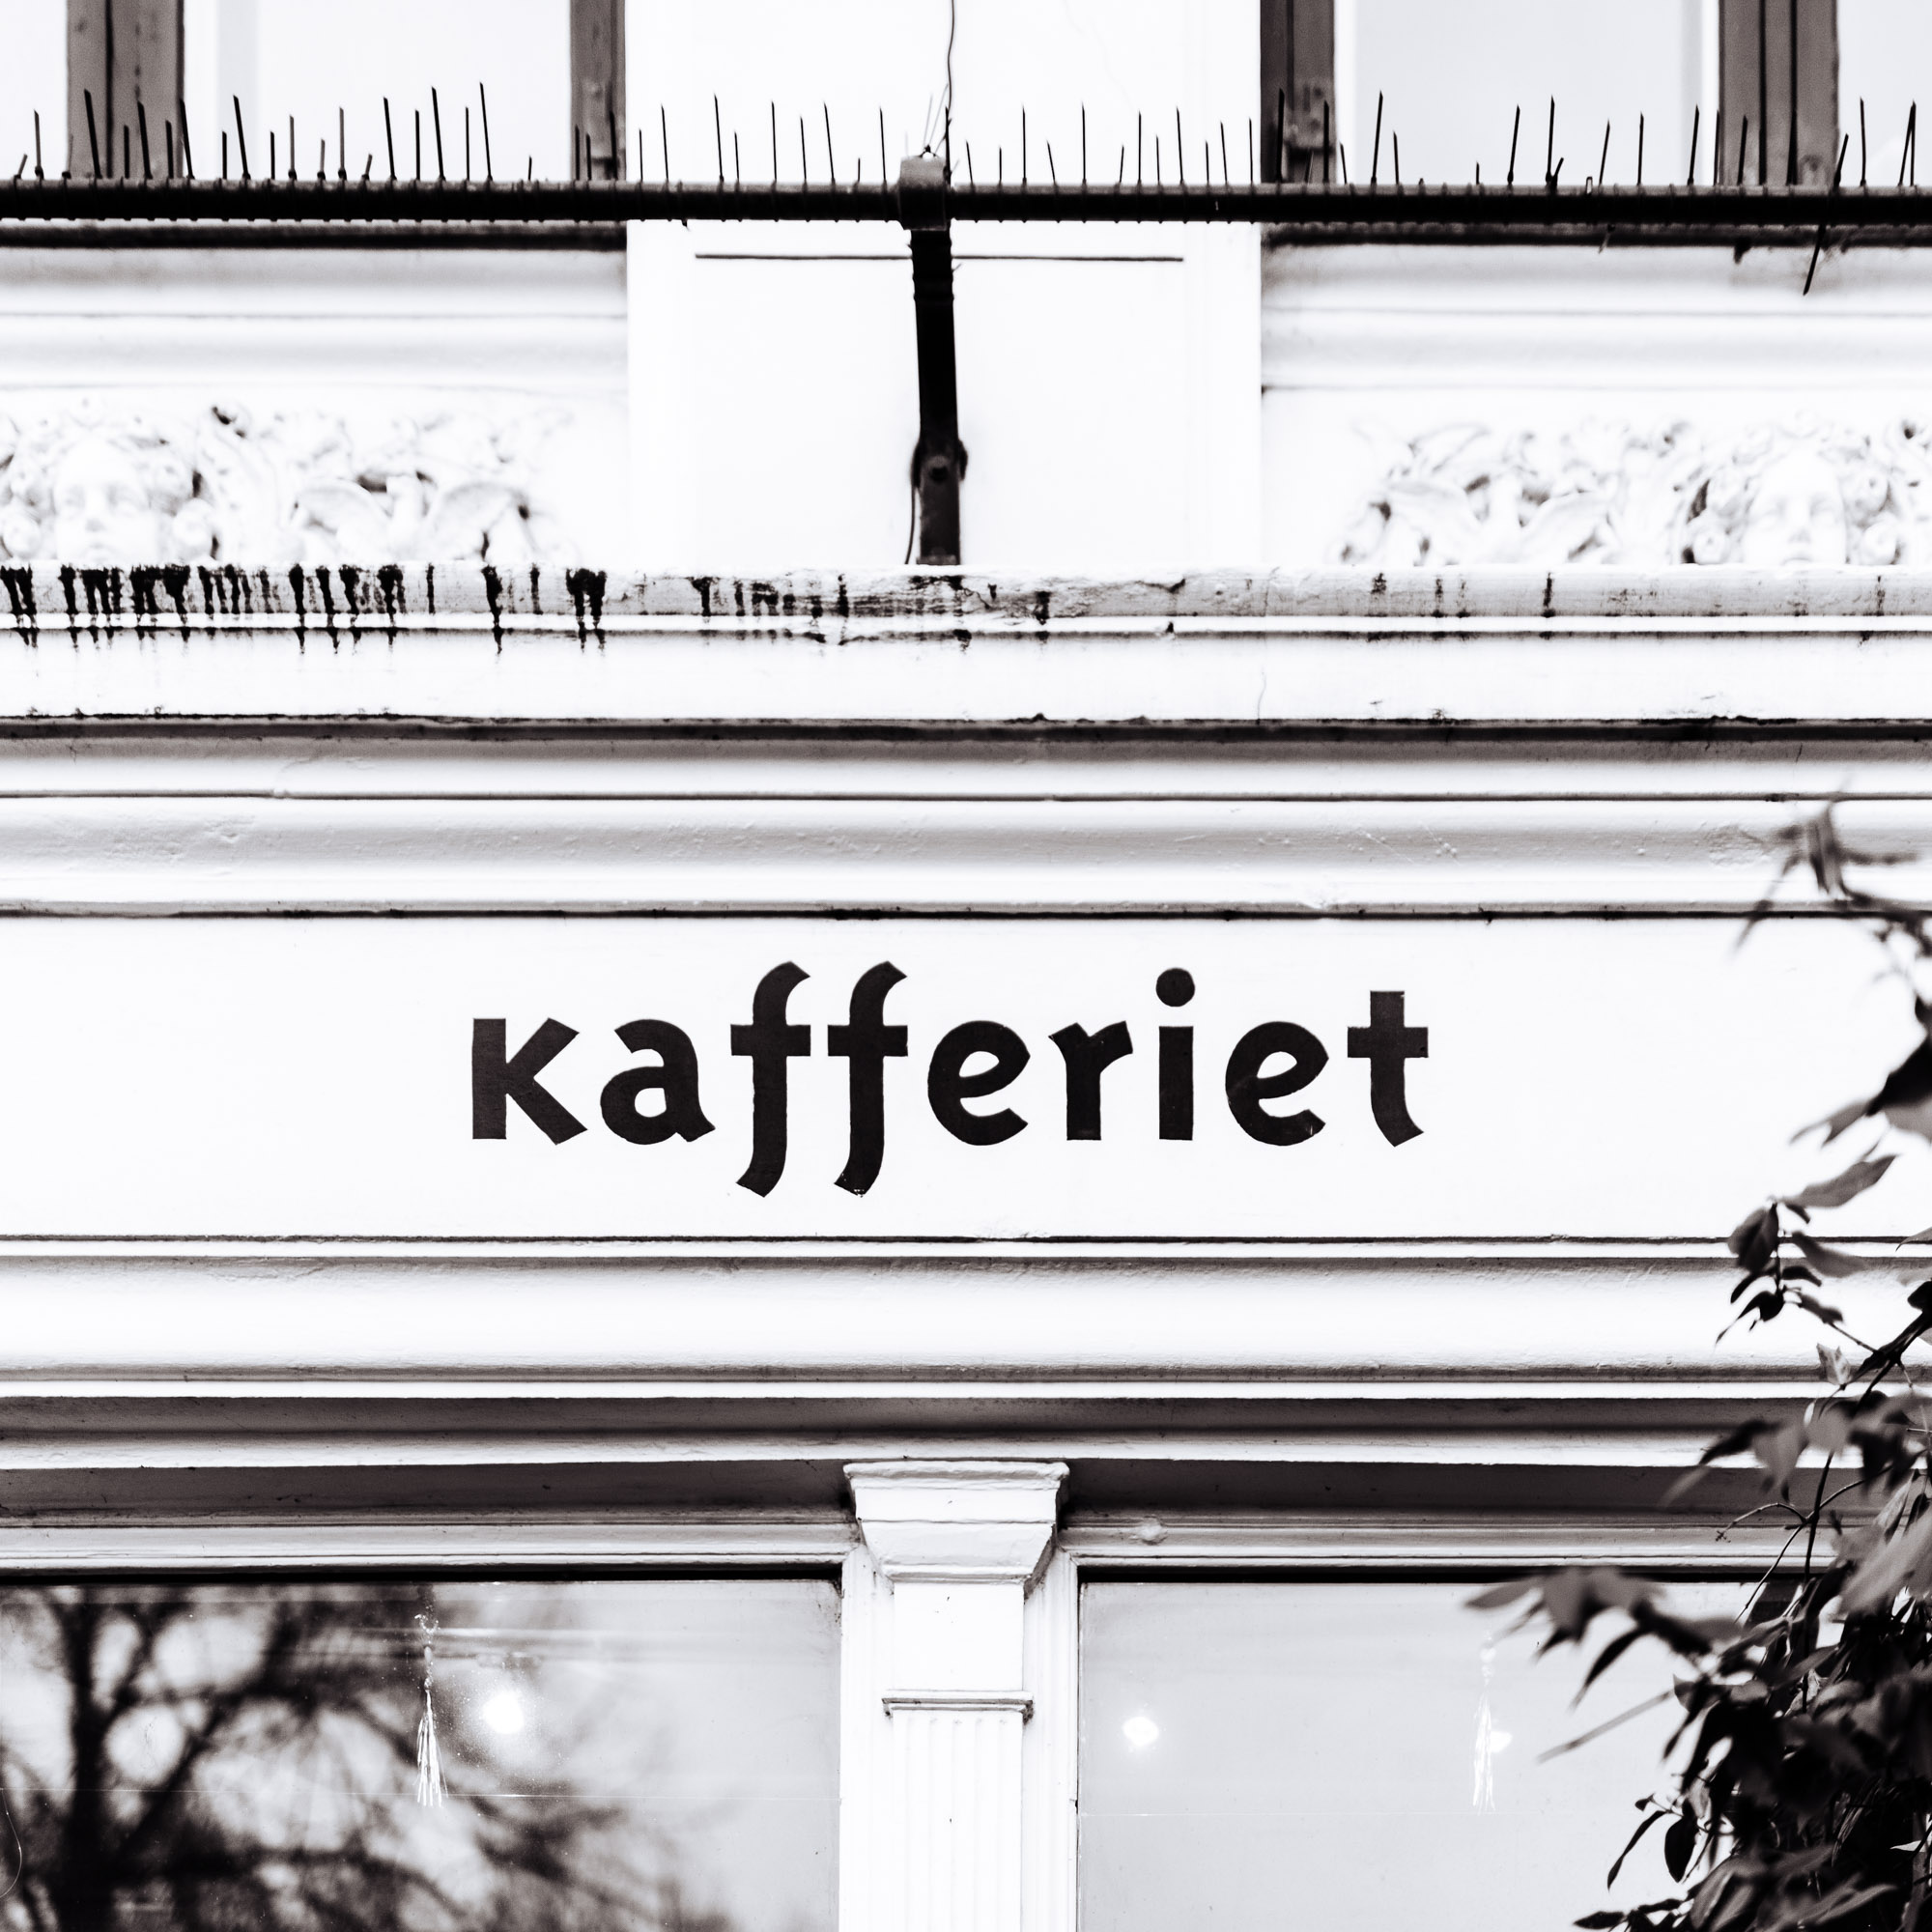 Jeff On The Road - Copenhagen - Coffee - Kafferiet - All photos are under Copyright © 2017 Jeff Frenette Photography / dezjeff. To use the photos, please contact me at dezjeff@me.com.